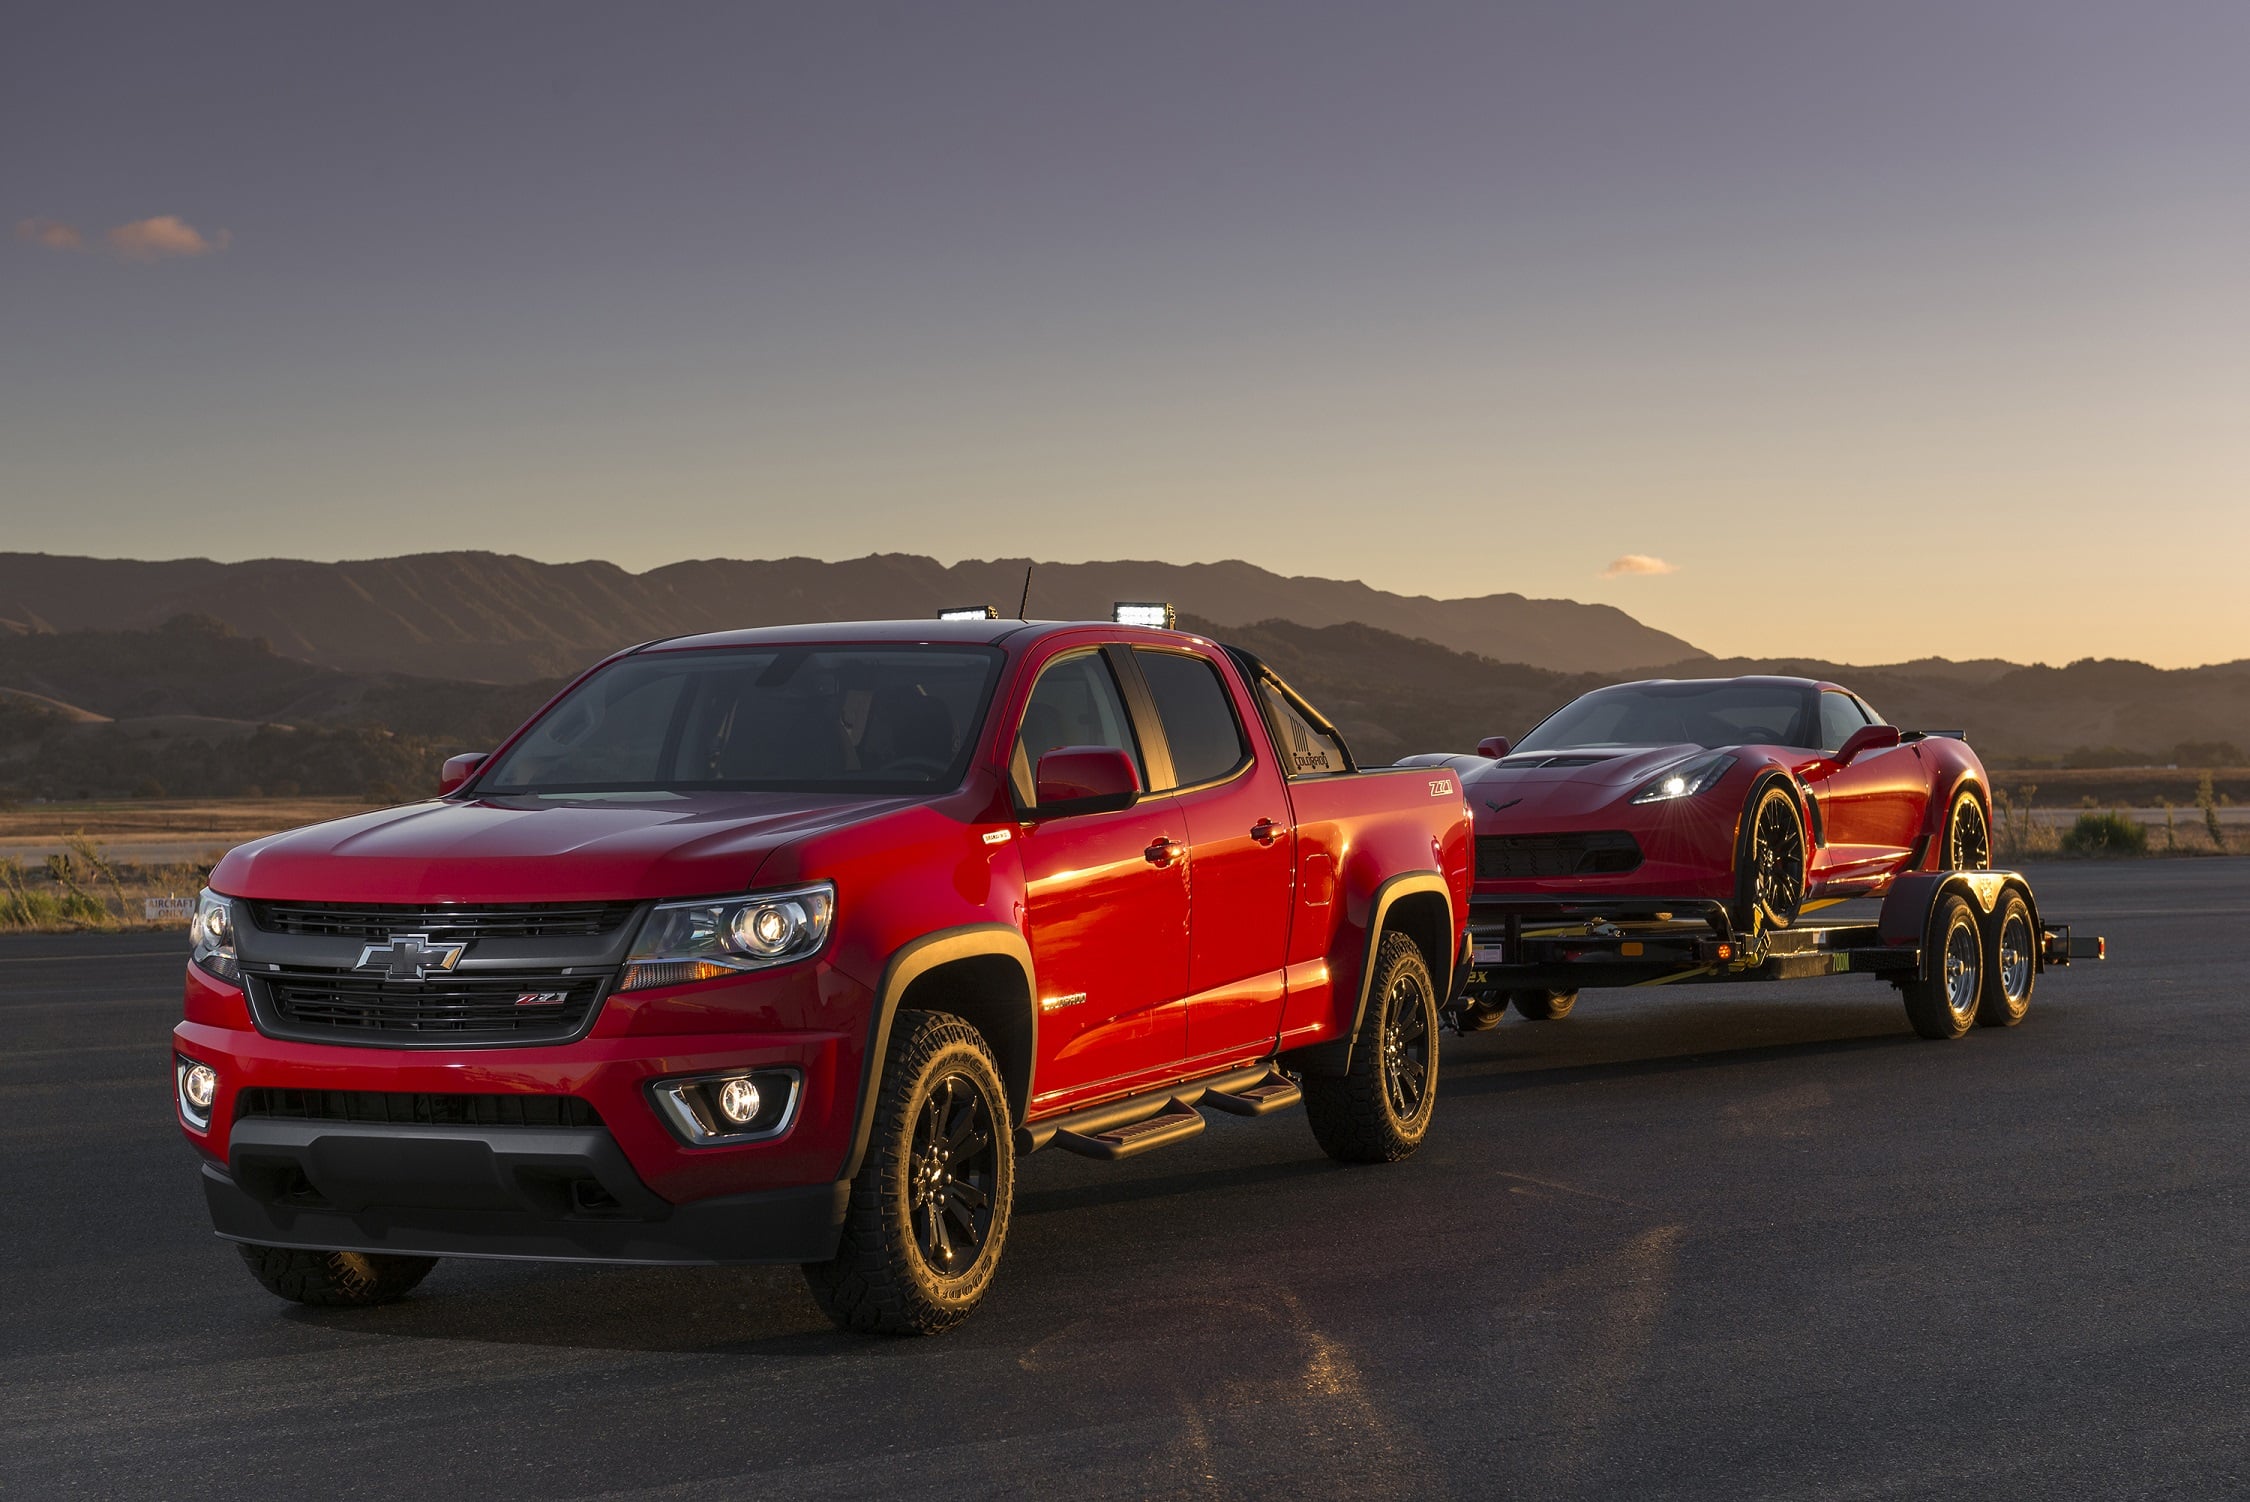 Chevrolet Colorado Pickup Getting New Engine, New Transmission for 2017